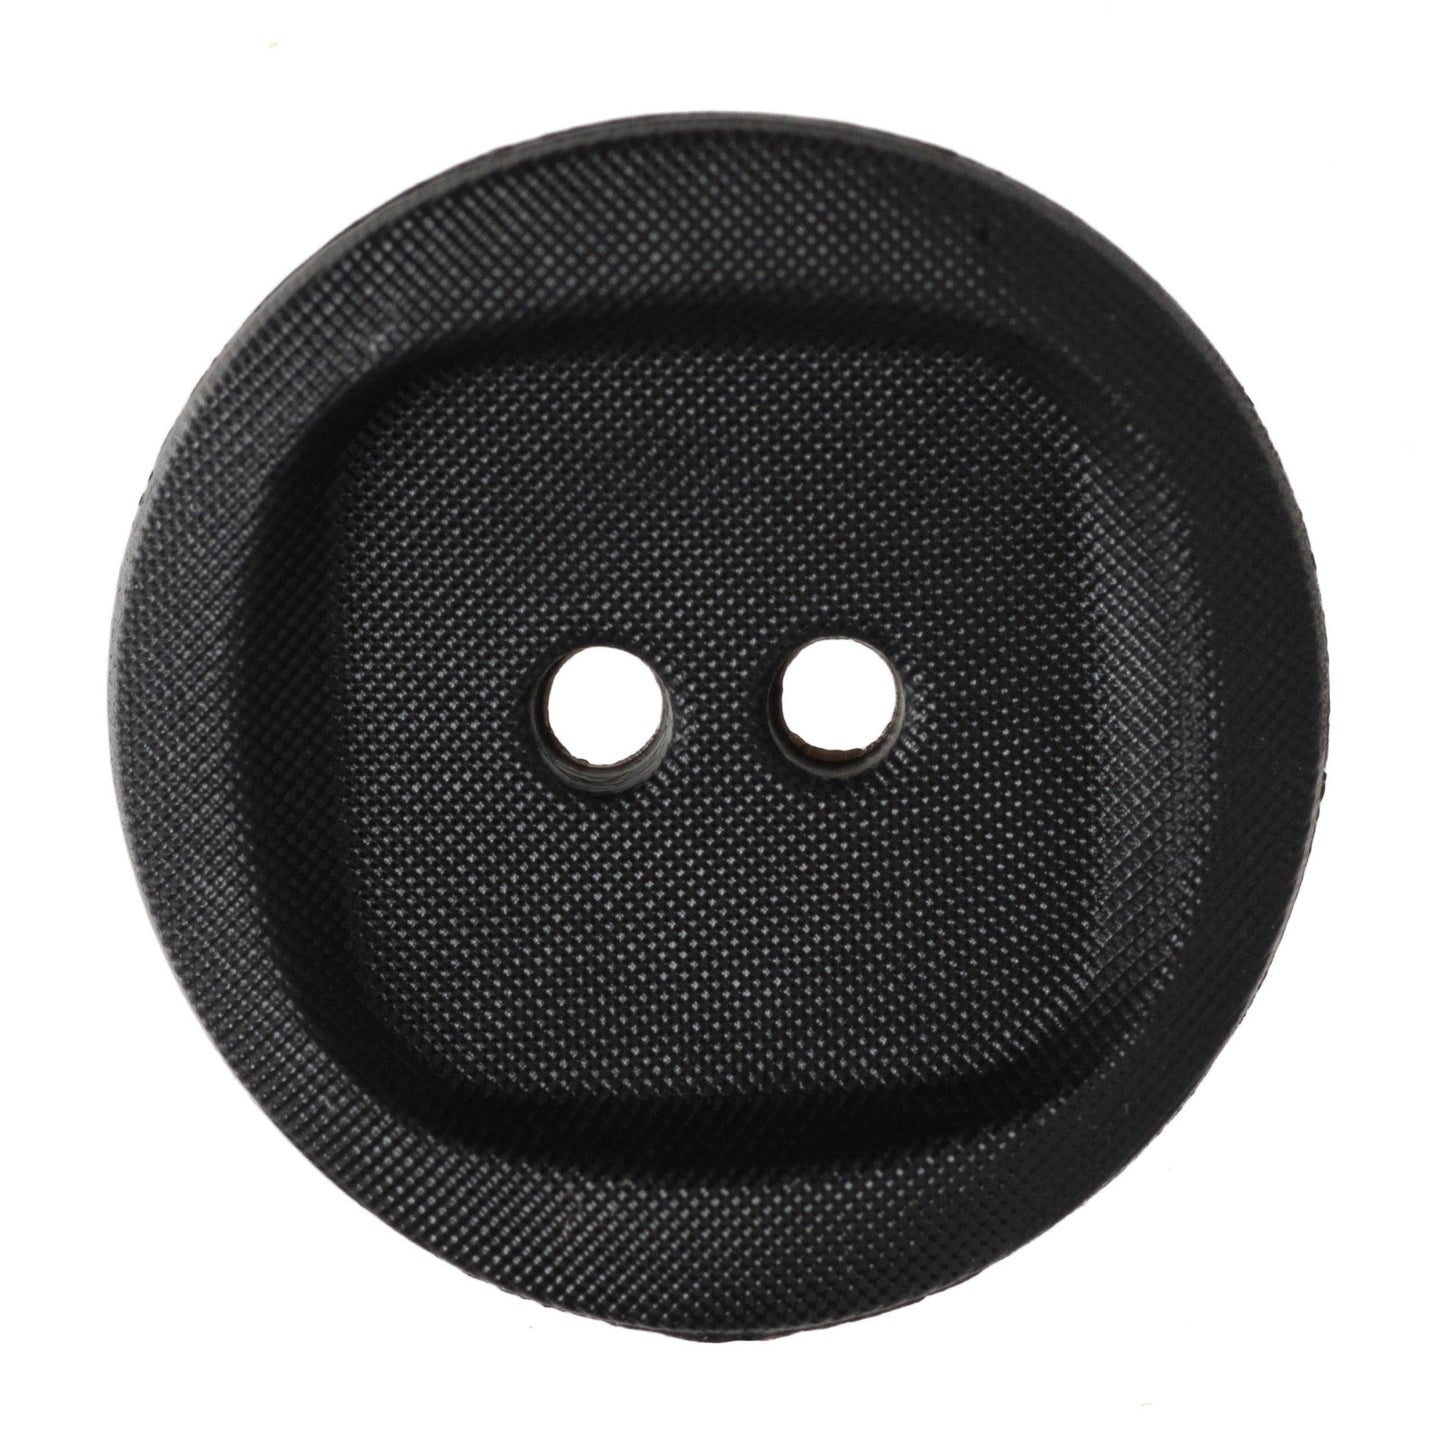 2 Hole Wavy with Square Insert Button - 20mm - Black [LD6.3]